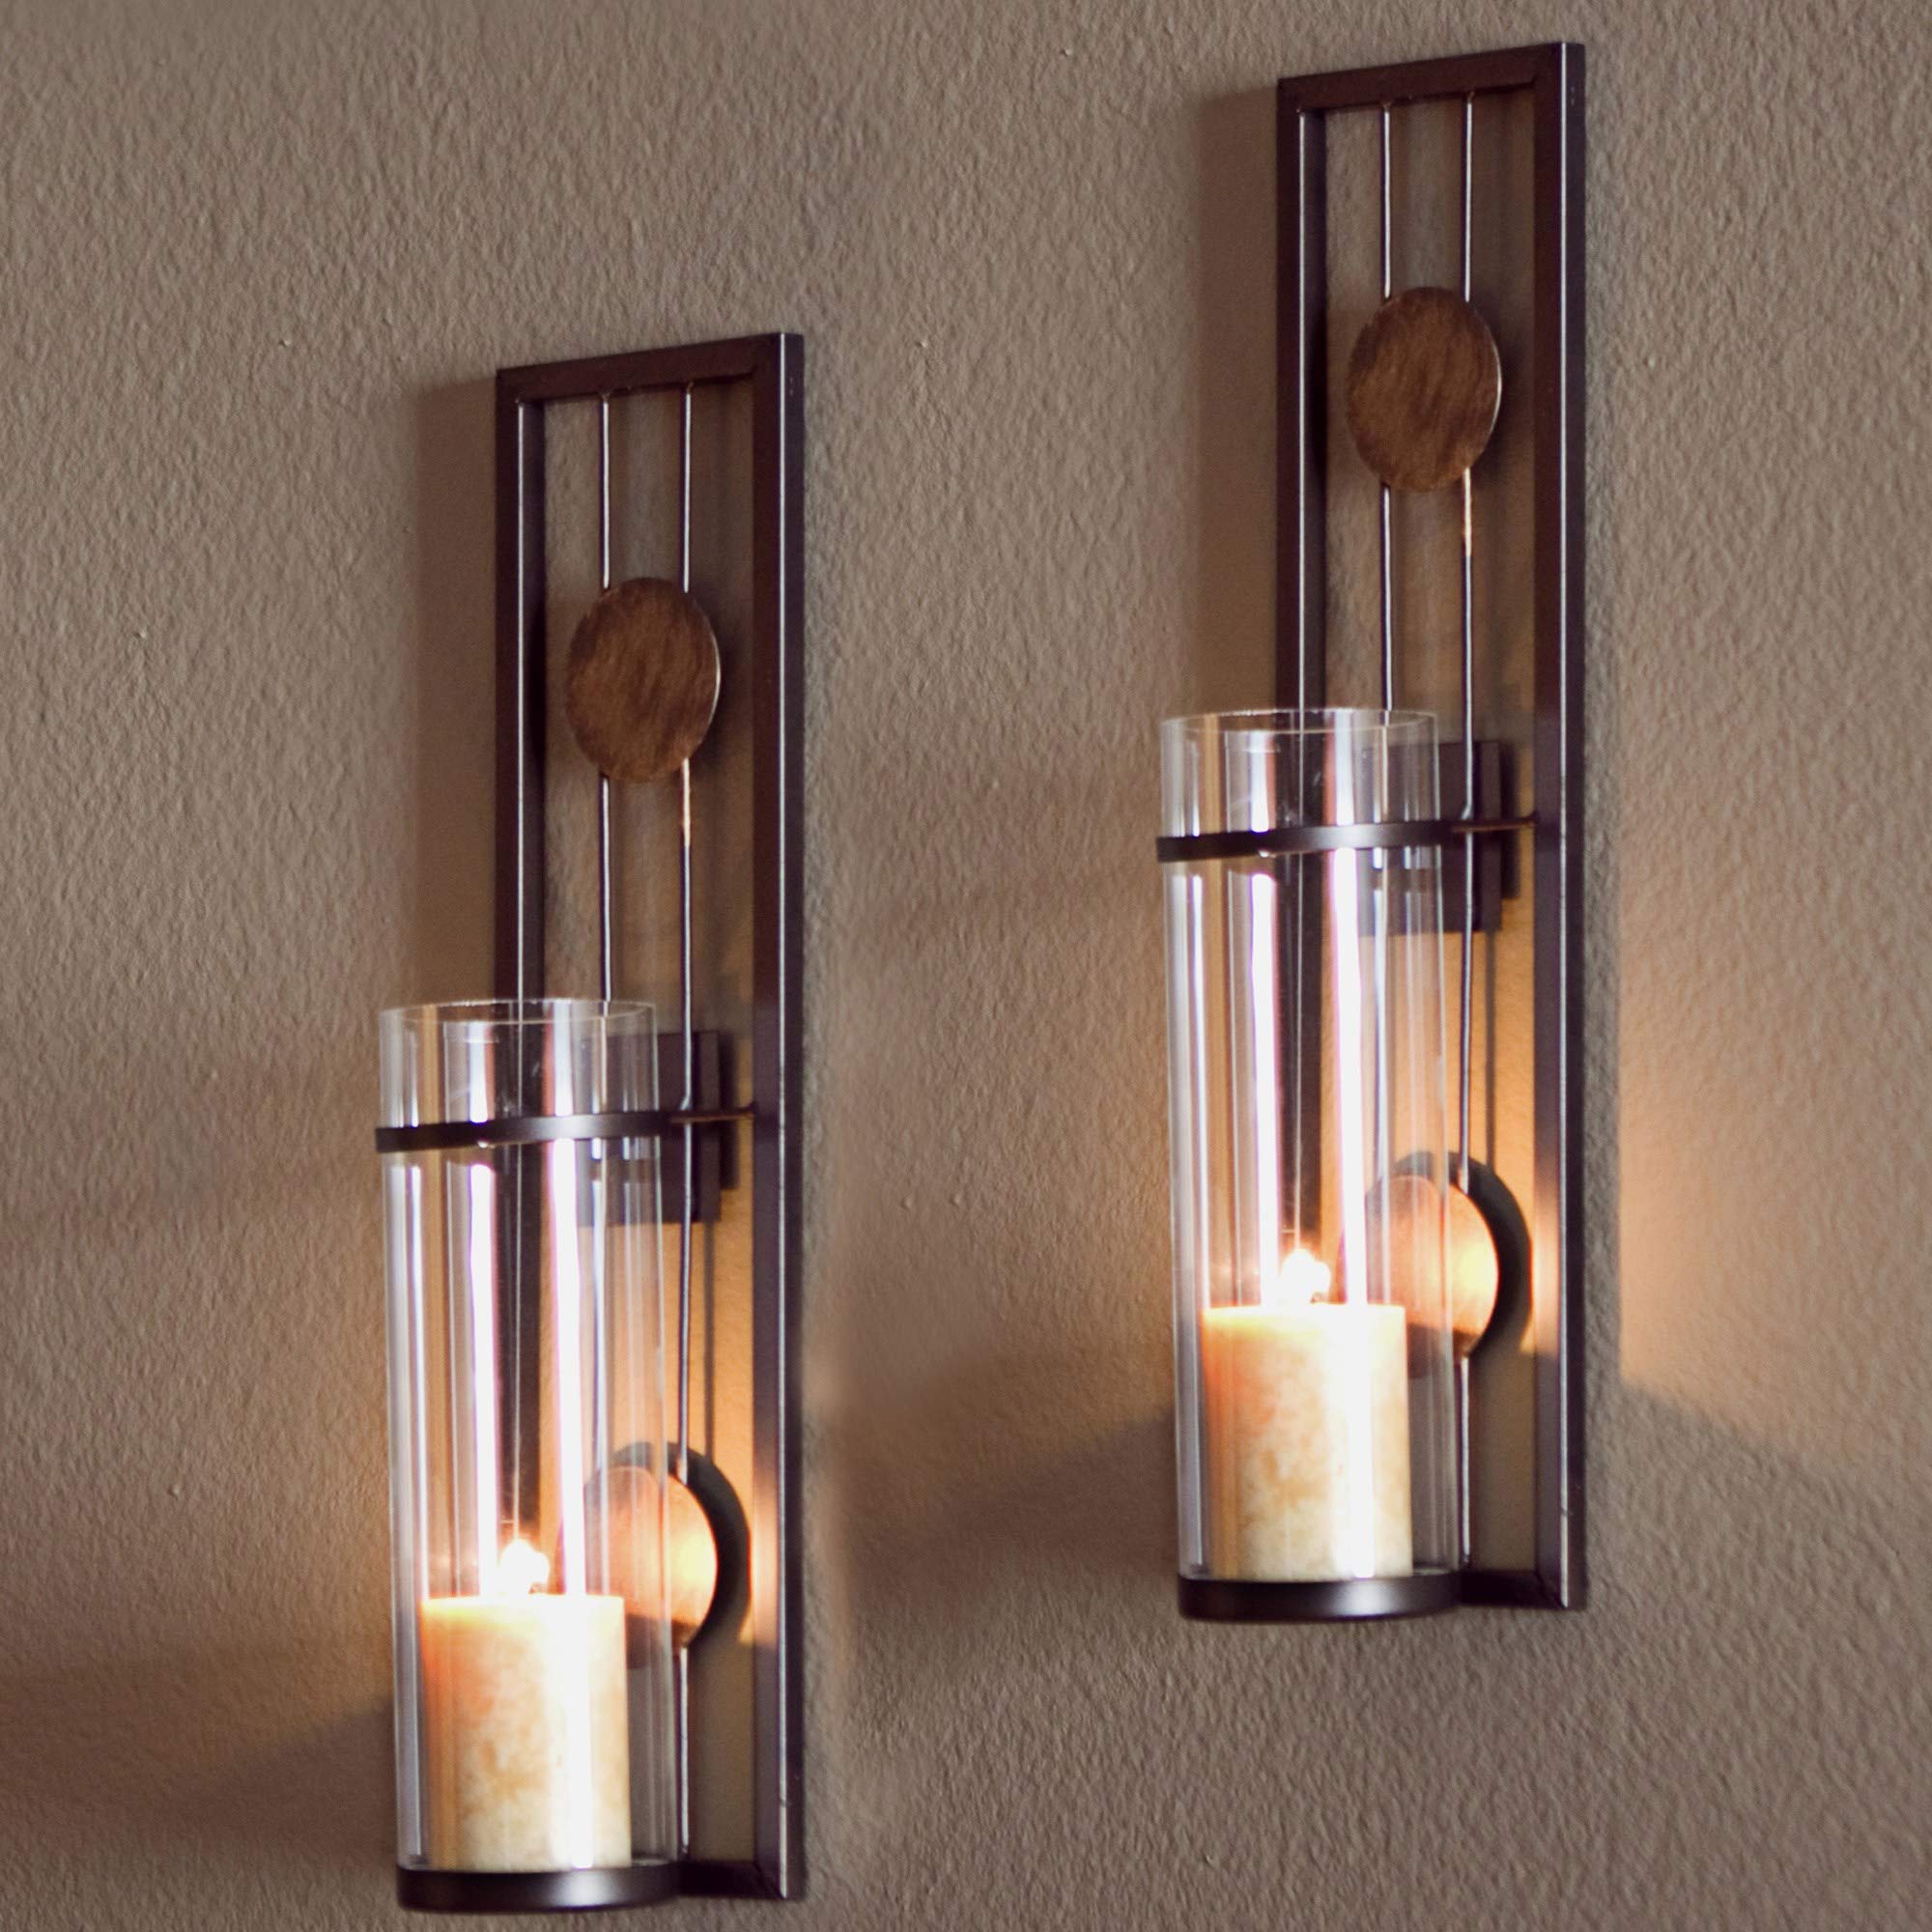 COLIBYOU 2 Piece Brown Tan Candle Holders Metal Sconce Set Modern Contemporary Wall Sconces Candles Warm Romantic Ambiance Elegant Geometric Design...